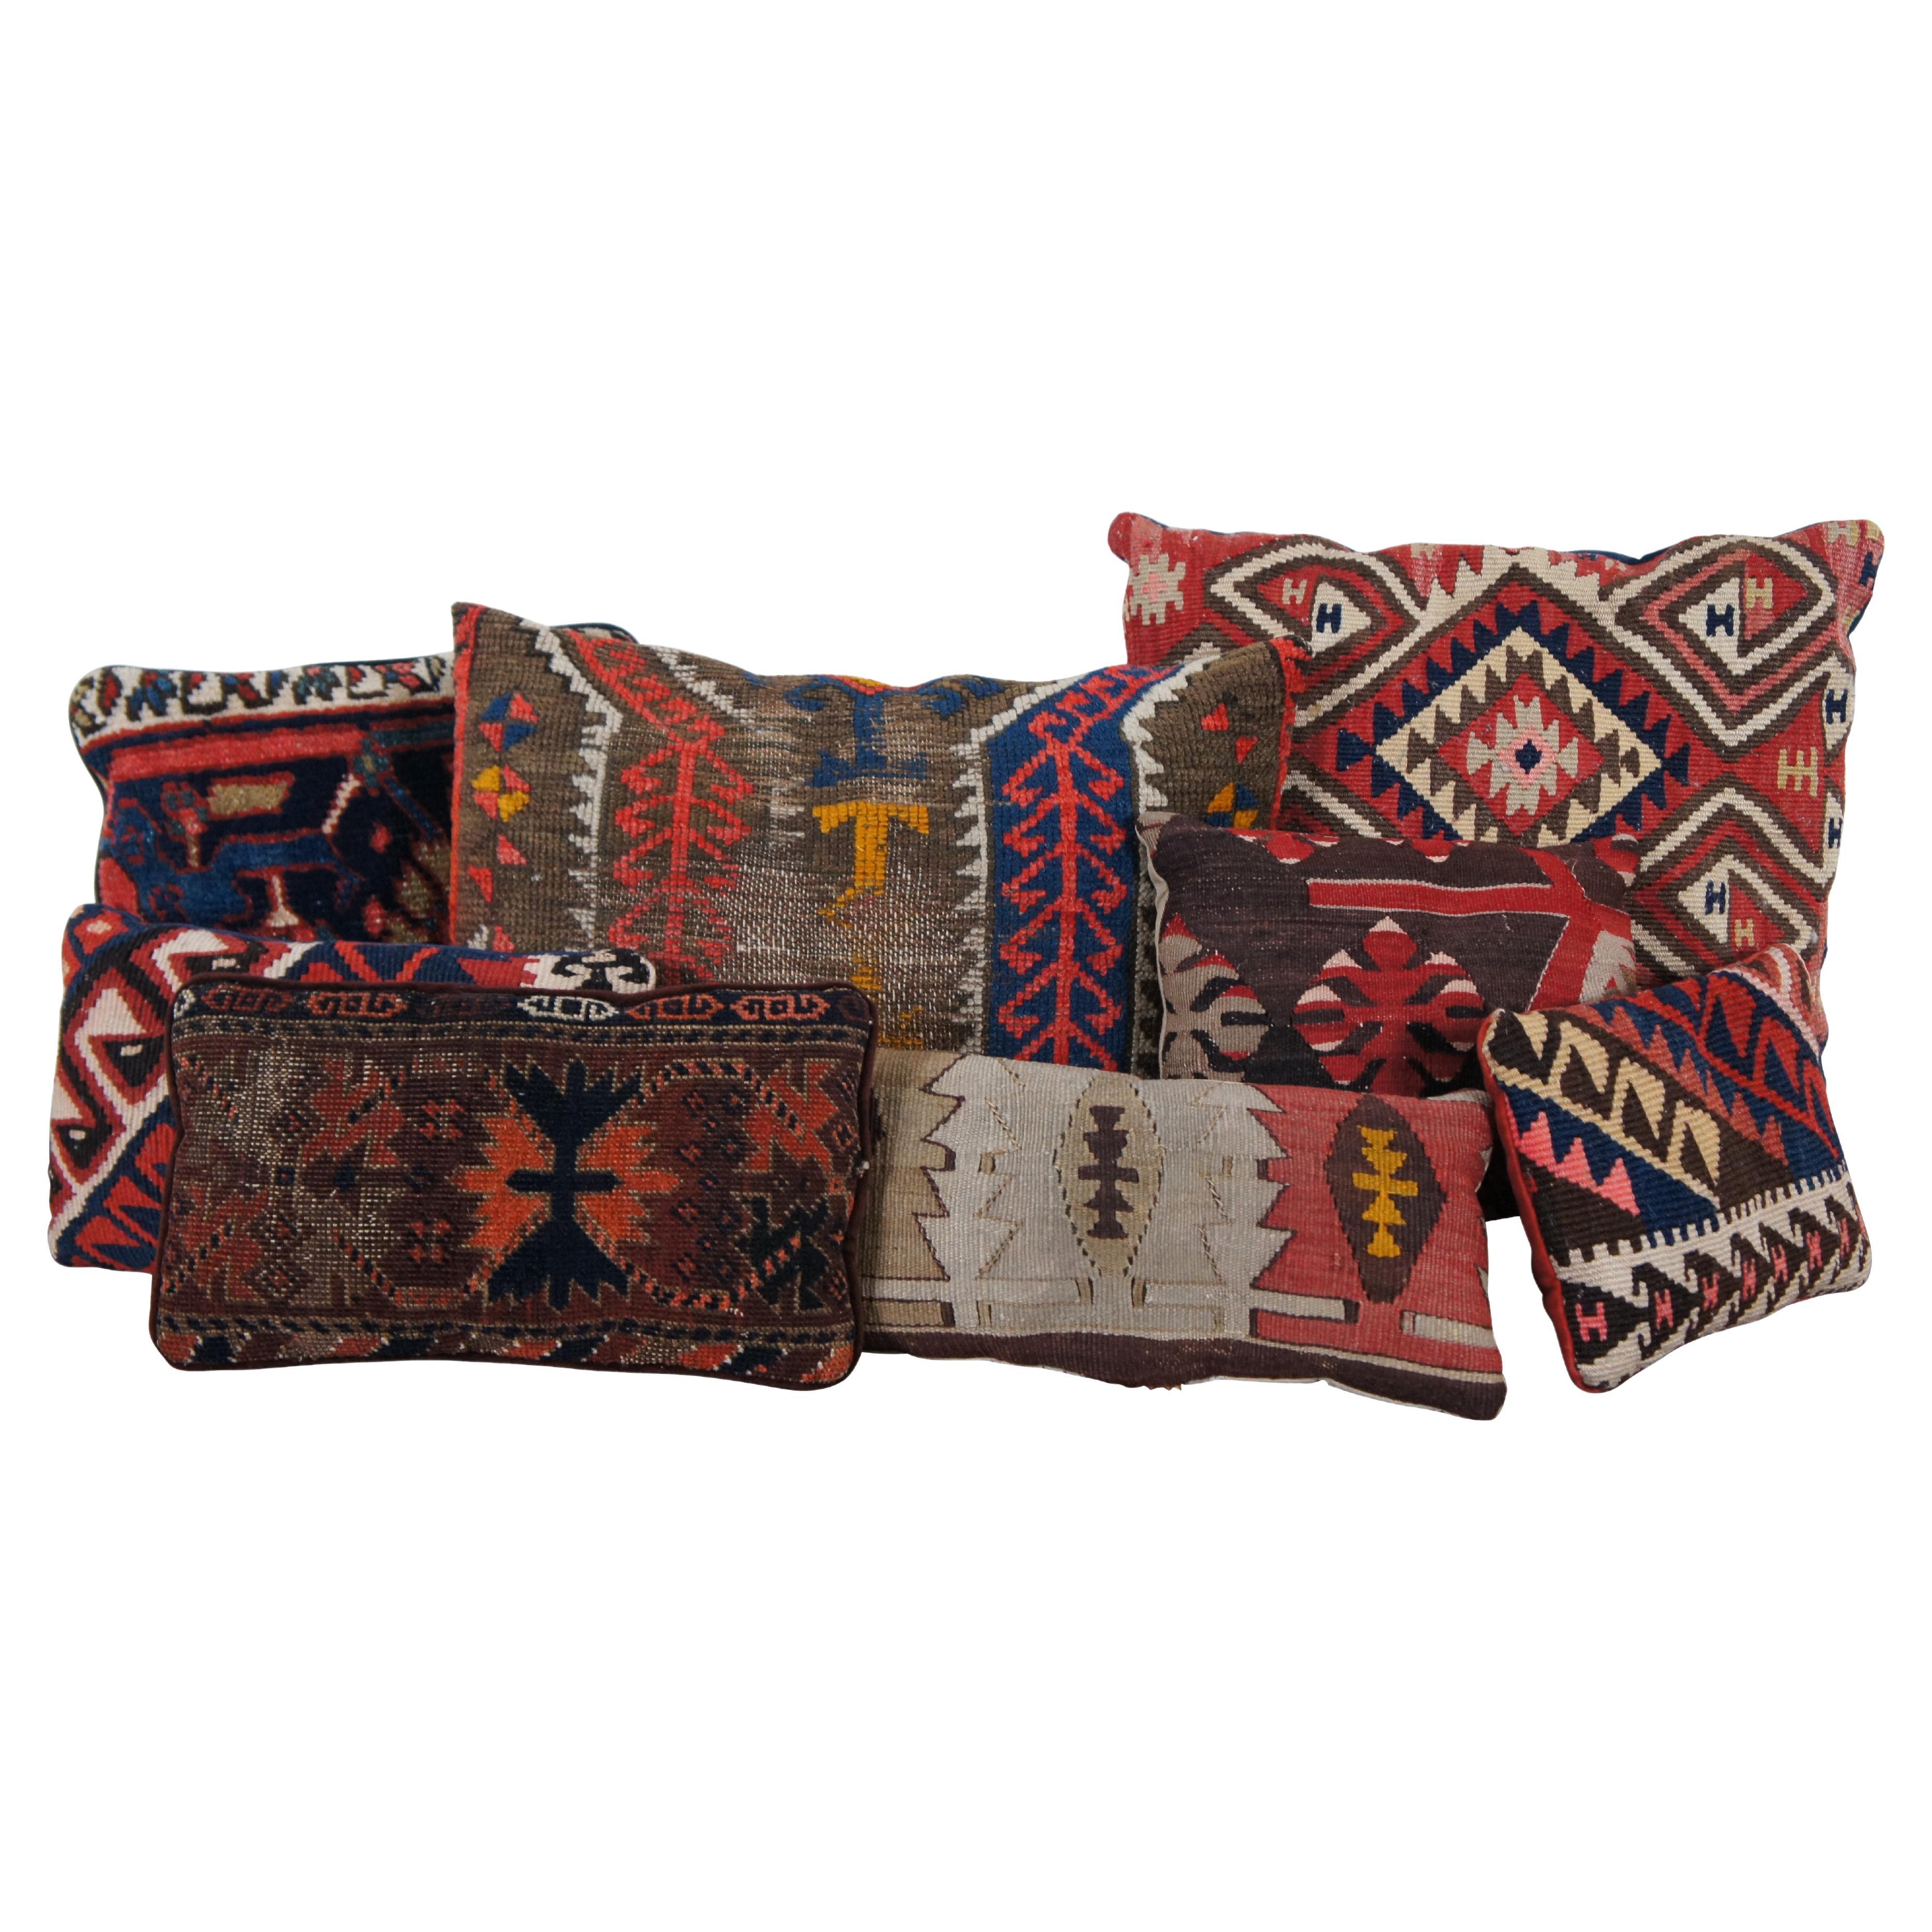 Lot of 7 Hand Woven Wool Kilim Rug Throw Accent Lumbar Pillows 11-20" For Sale